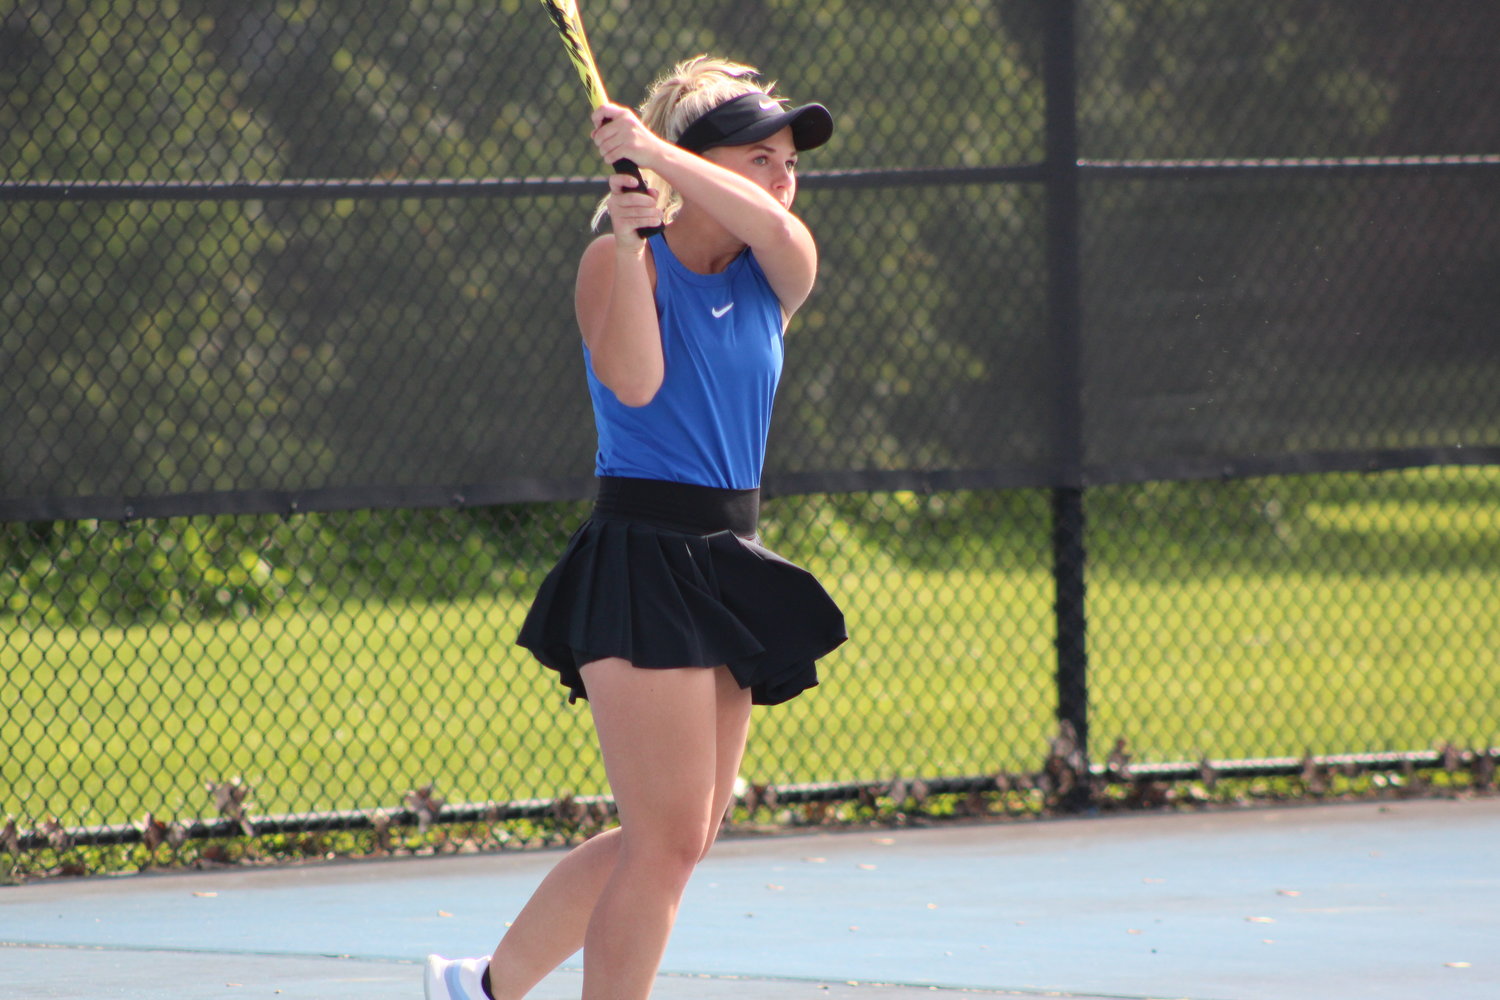 Codey Emerson/Journal Review
Crawfordsville’s Lilly Klingbeil along with one doubles partner Cathleen McGrady will move on in the individual doubles tournament after their win over Greencastle.